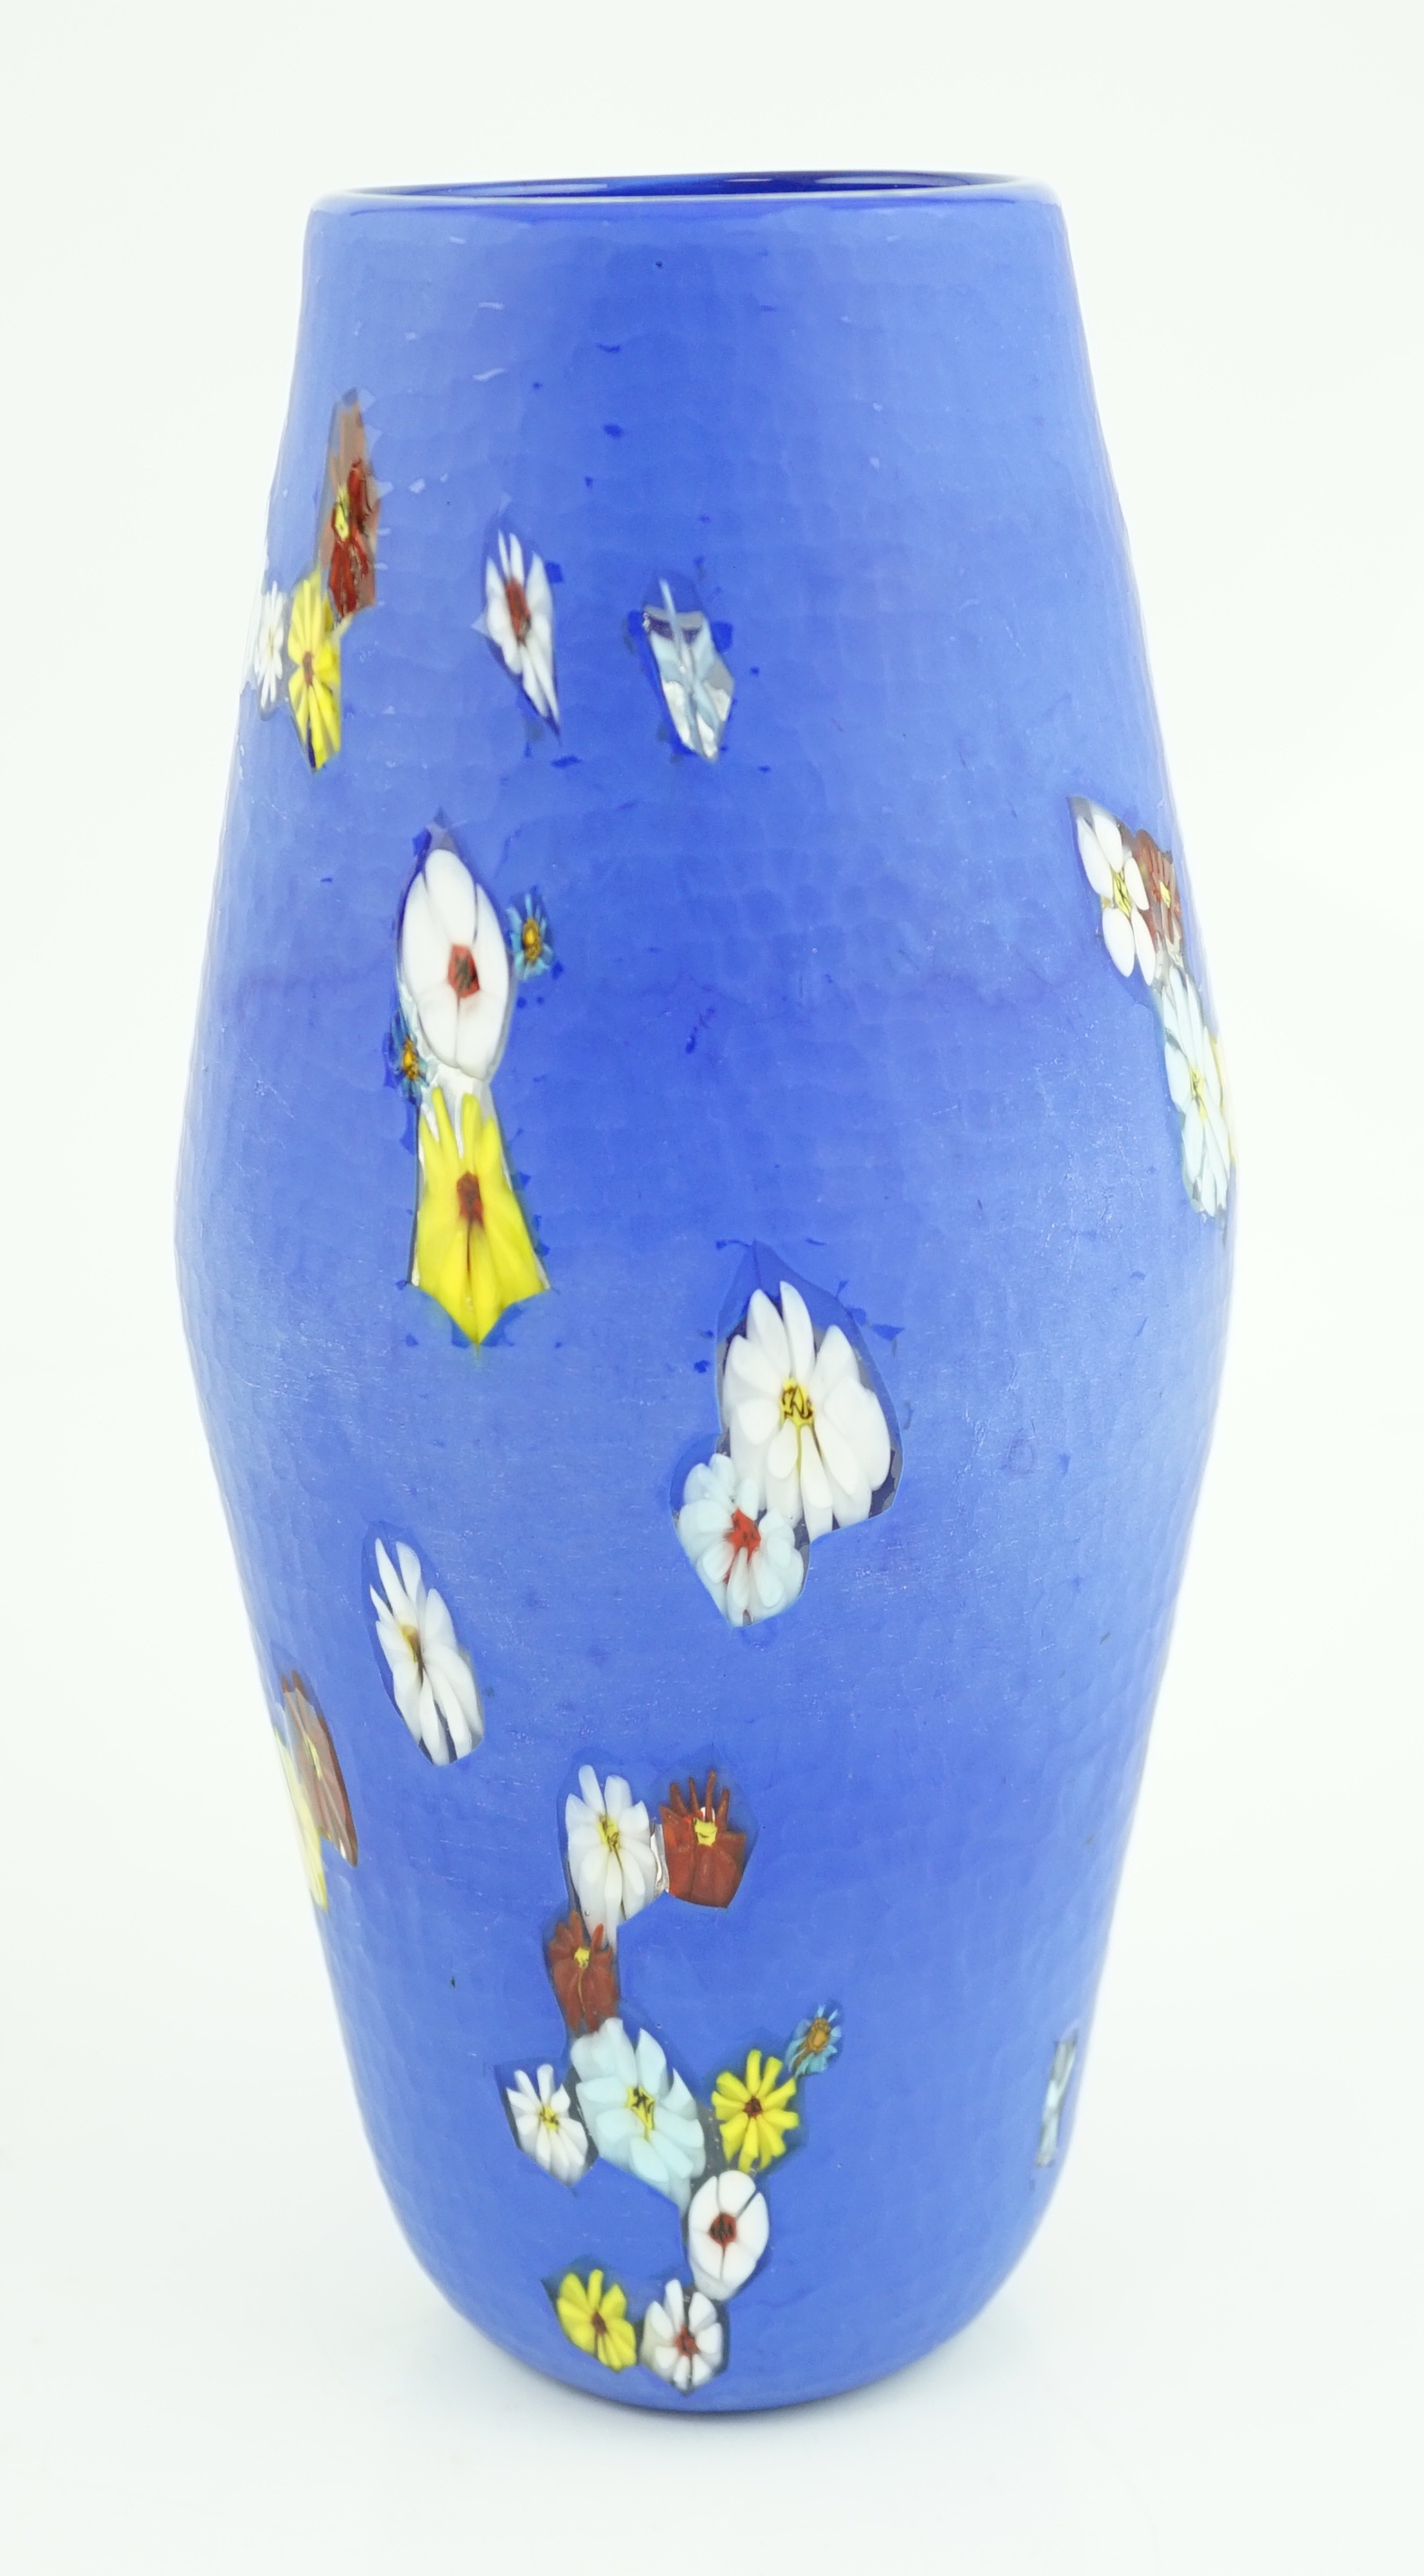 Vittorio Ferro (1932-2012) A Murano glass Murrine vase, the blue ground scattered with polychrome flowers, unsigned, 29cm, Please note this lot attracts an additional import tax of 20% on the hammer price